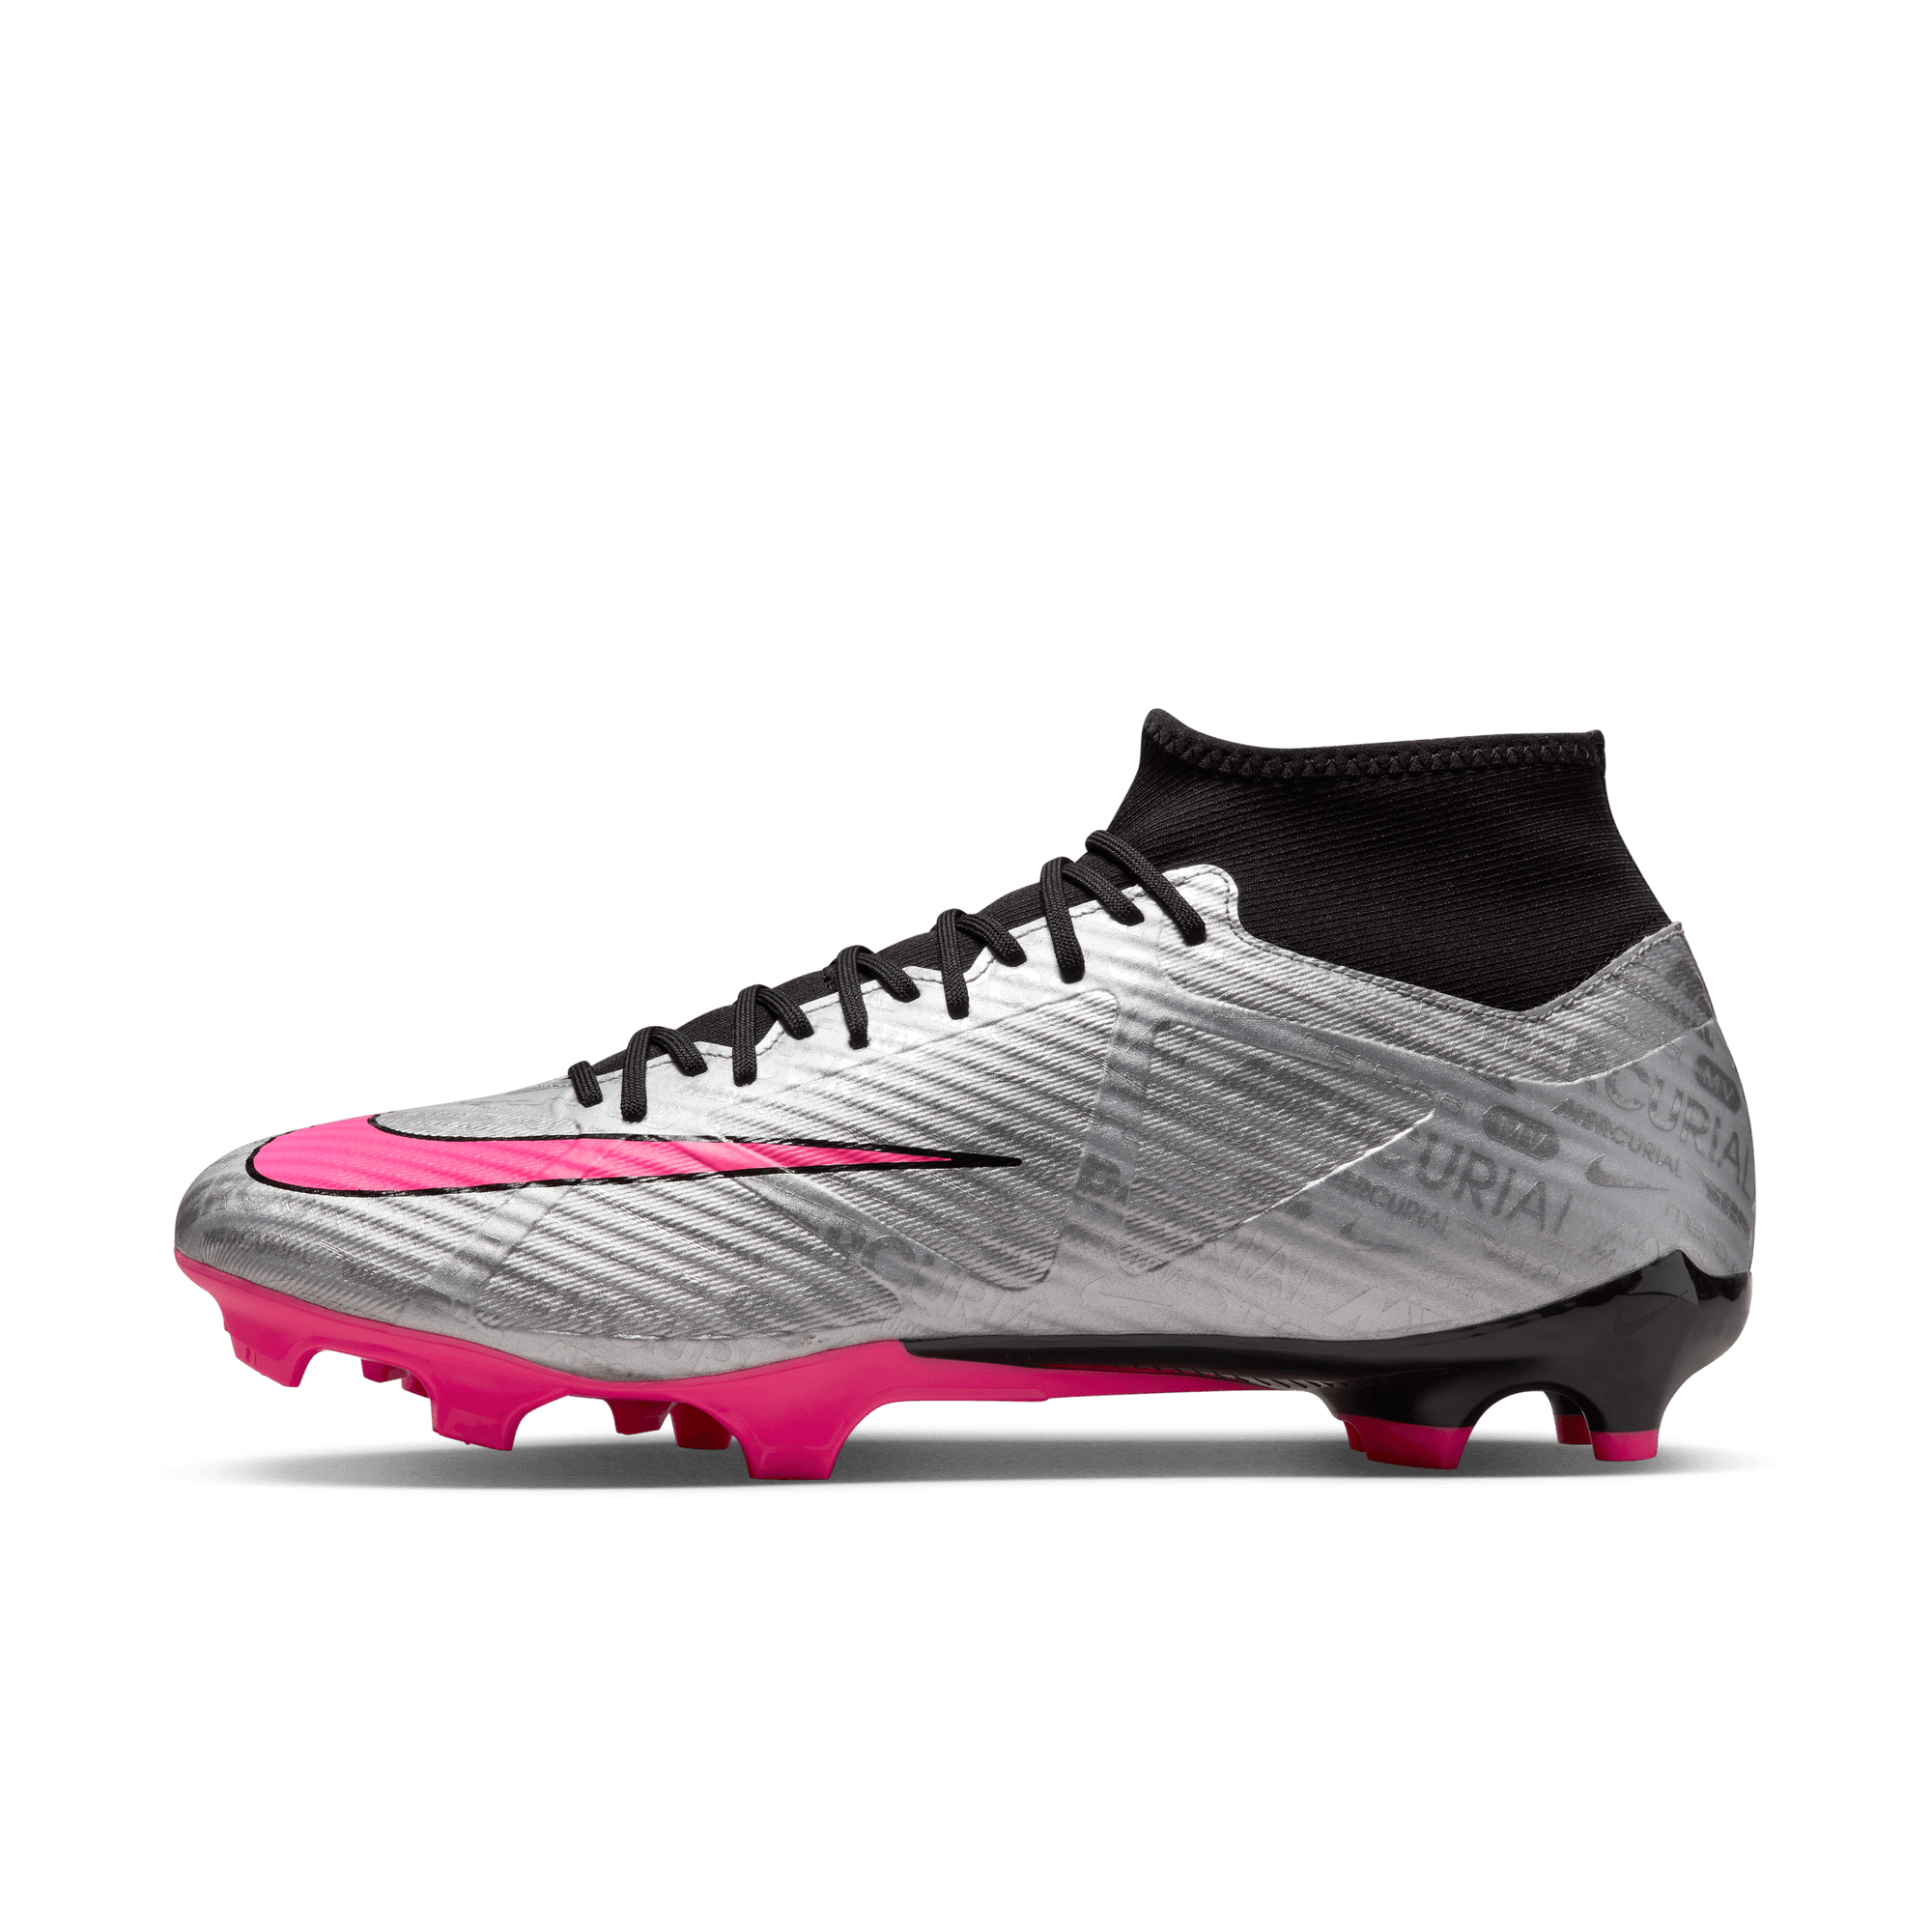 stefanssoccer.com:Nike Zoom 9 Academy XXV Firm Ground Cleats - Silver / Pink